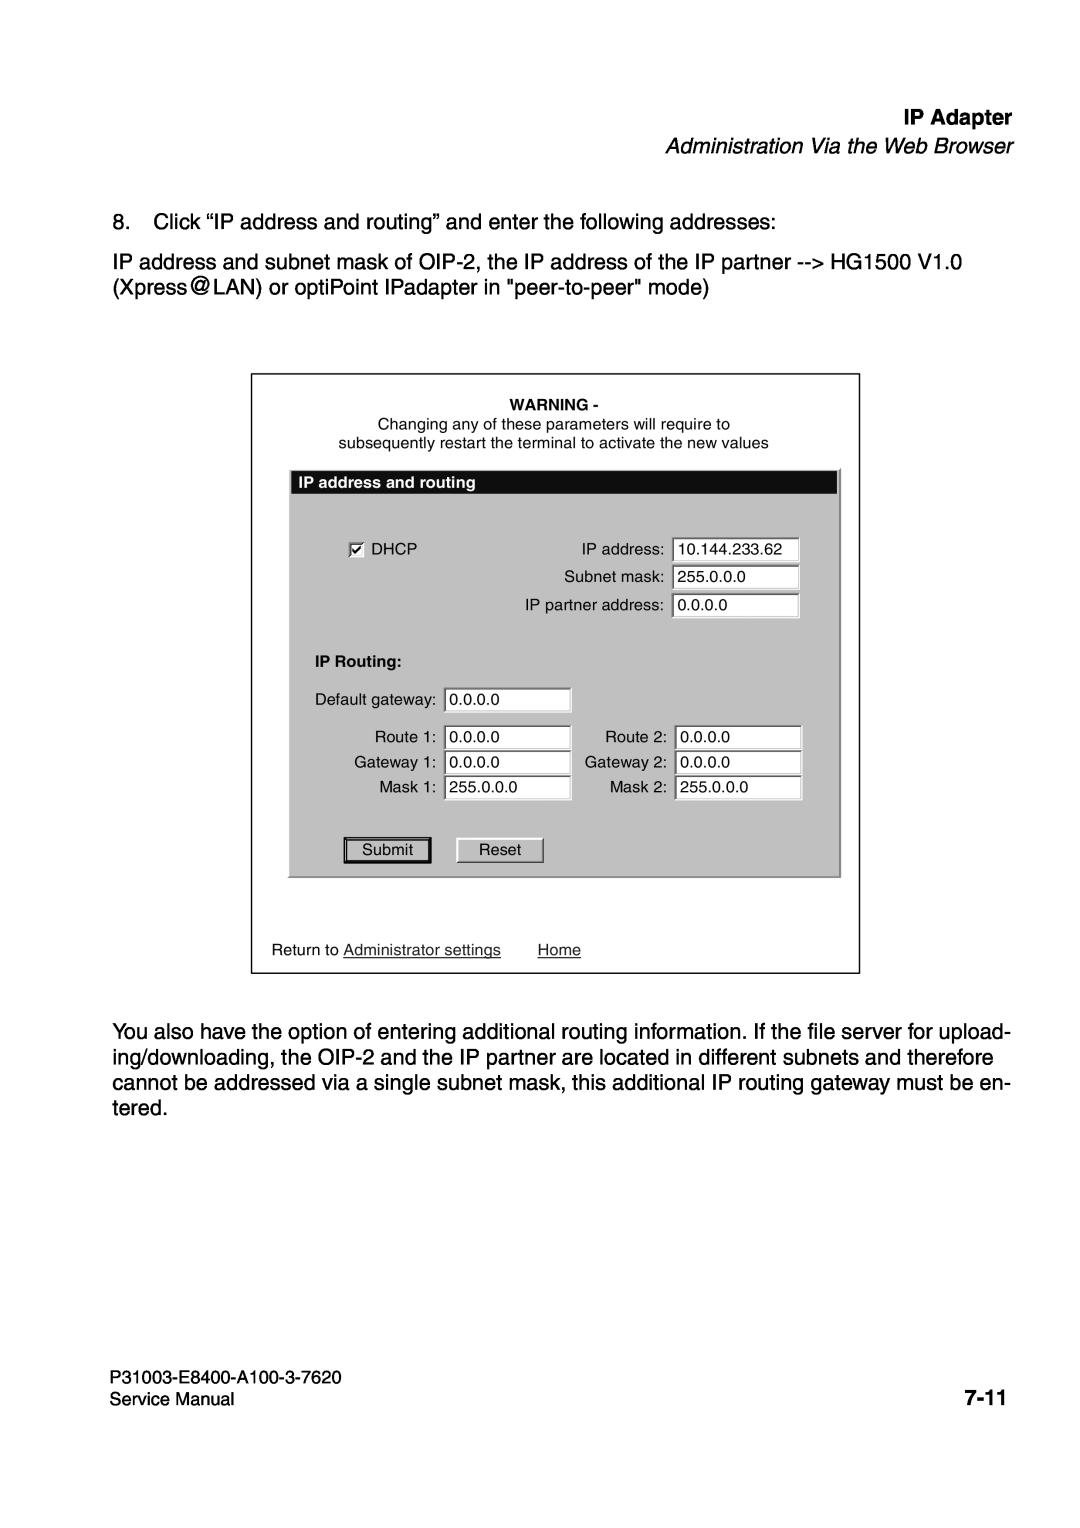 Siemens 500 service manual IP Adapter, Click “IP address and routing” and enter the following addresses, 7-11 